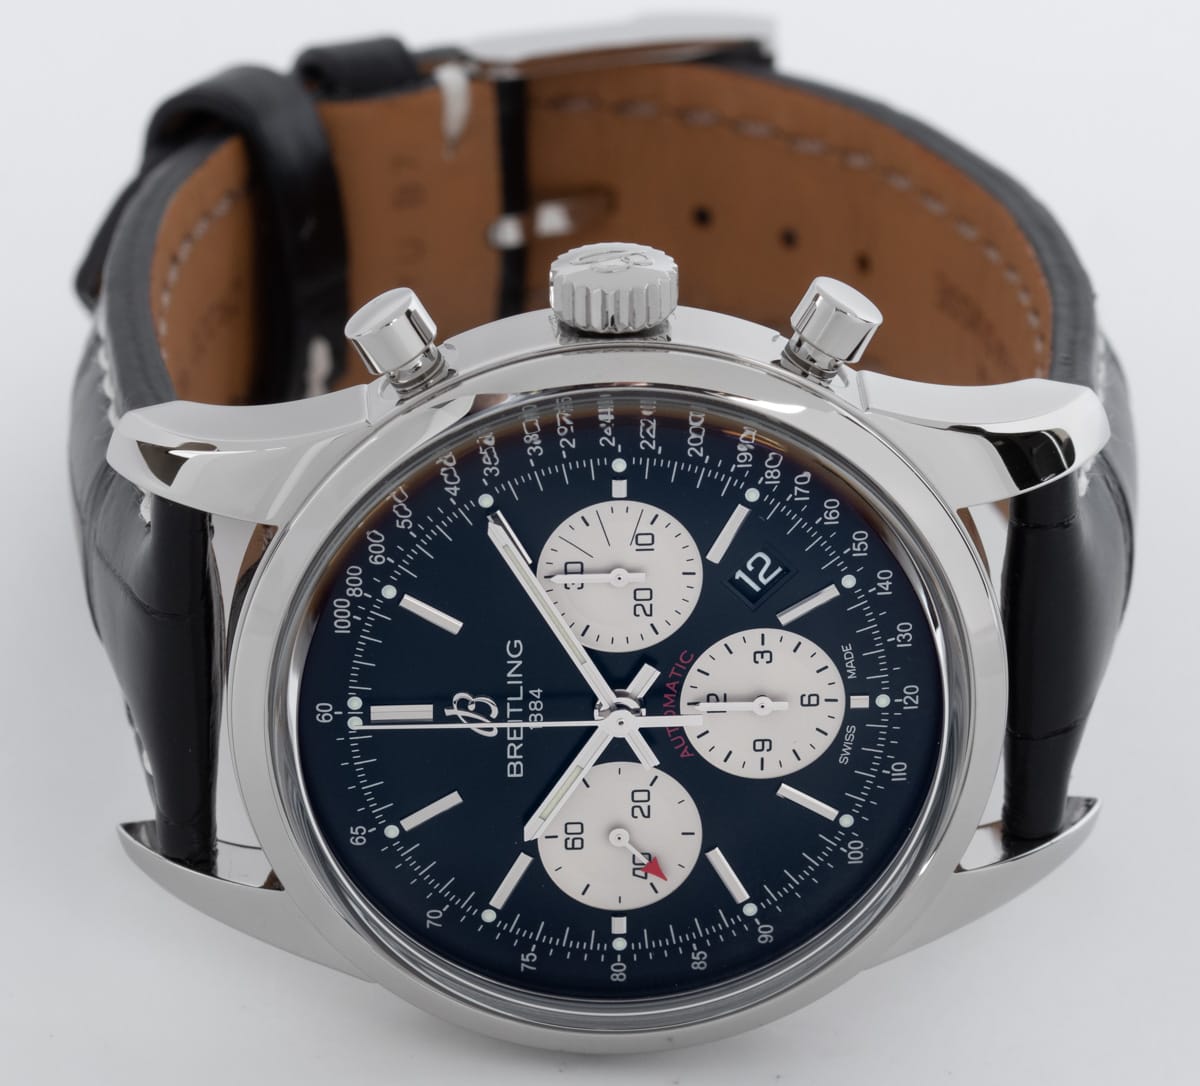 Front View of TransOcean Chronograph